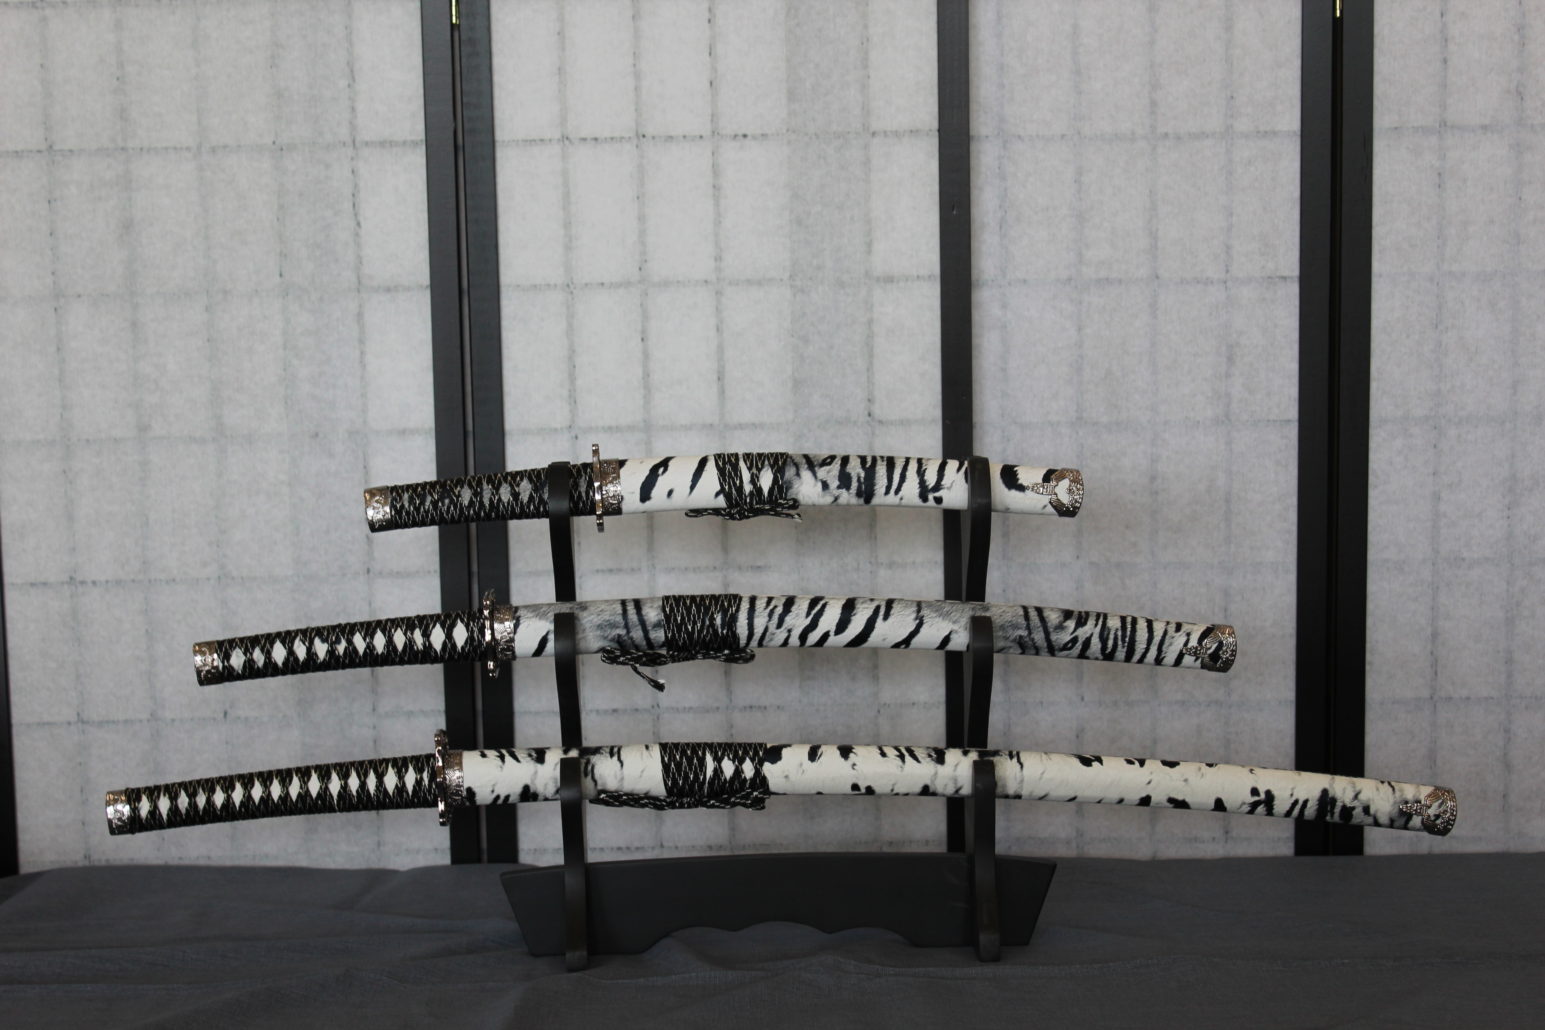 The largest selection of martial arts swords in central Arkanas